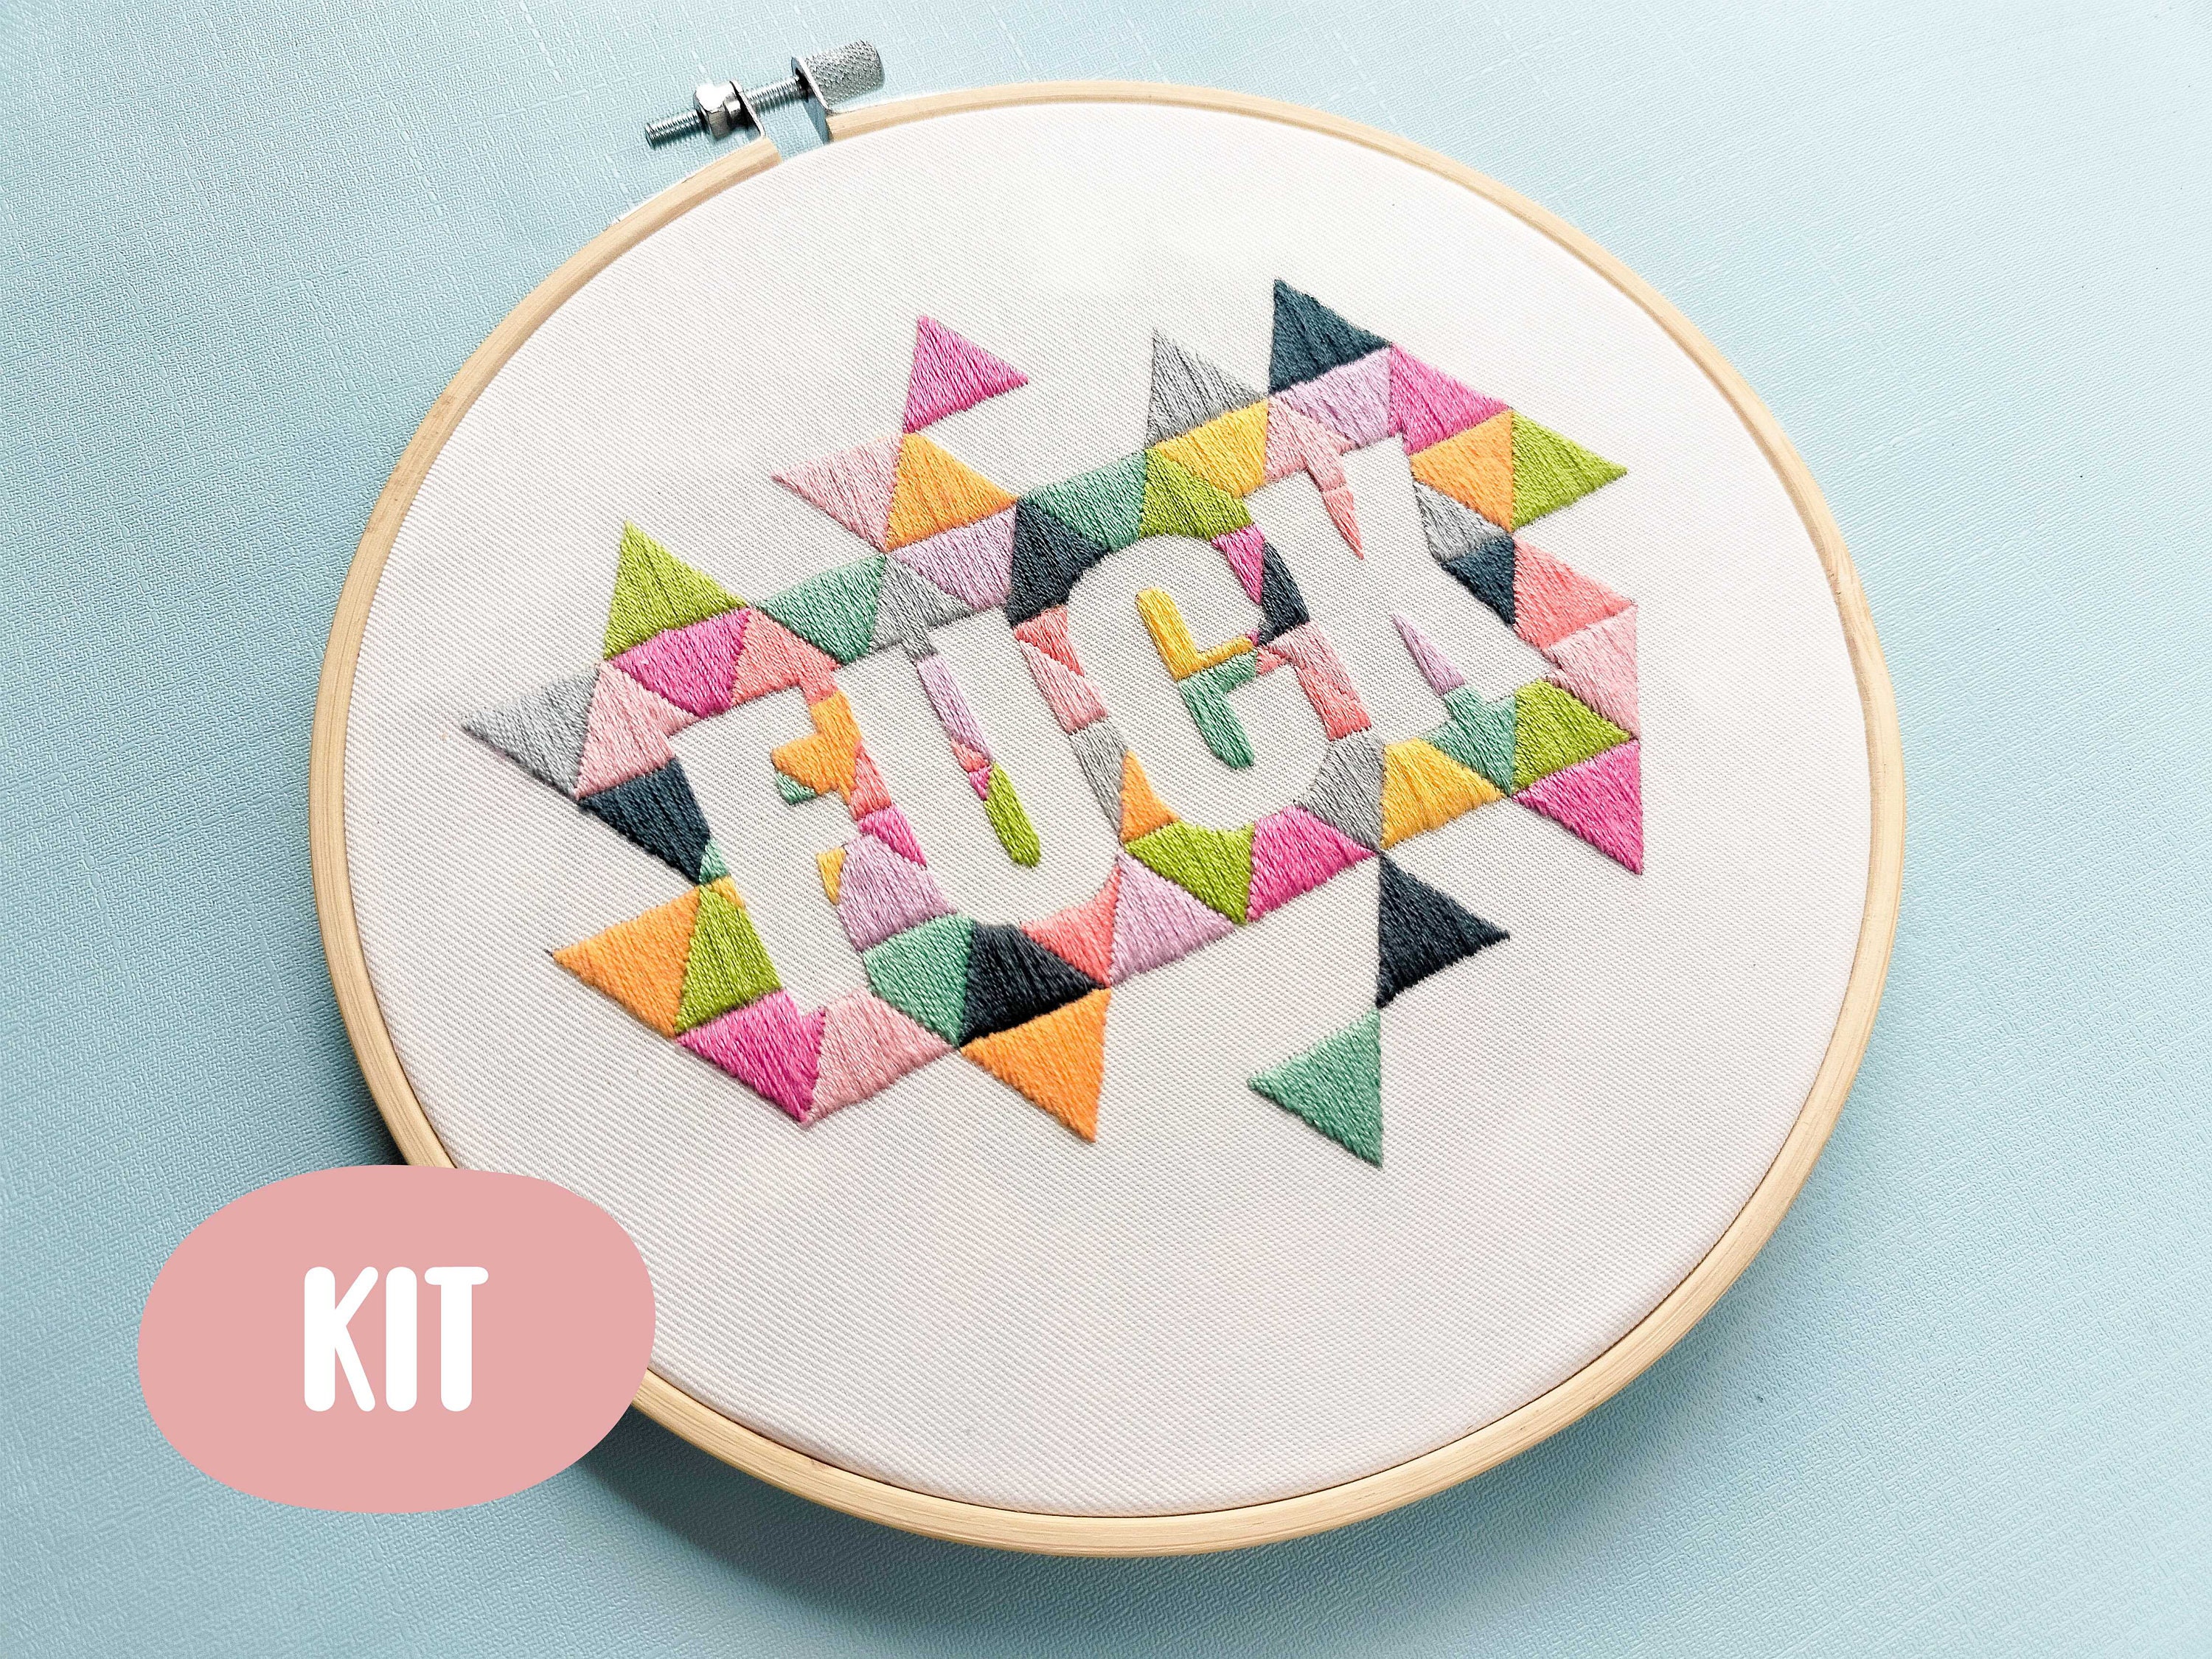 Funny Embroidery Kit, Beginner Embroidery Kit, DIY Craft Kit